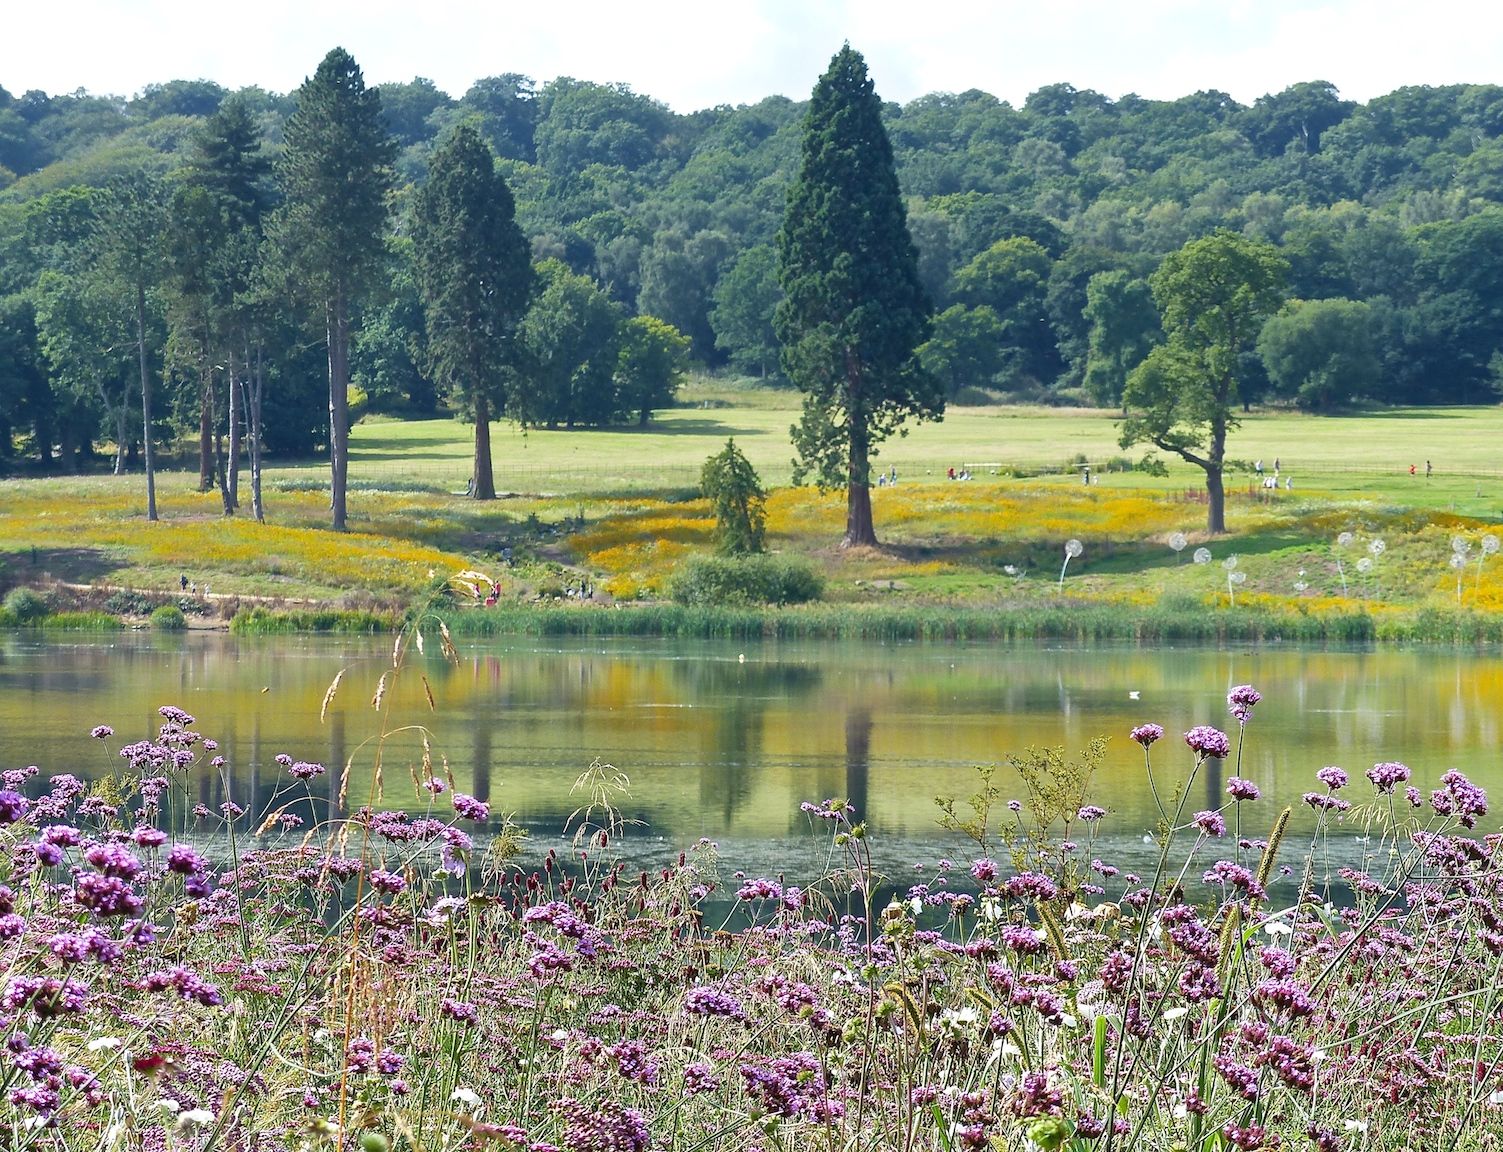 Lancelot  Capability  Brown worked on the landscape at Trentham between. 1759 and 1780 for the Earl Gower.